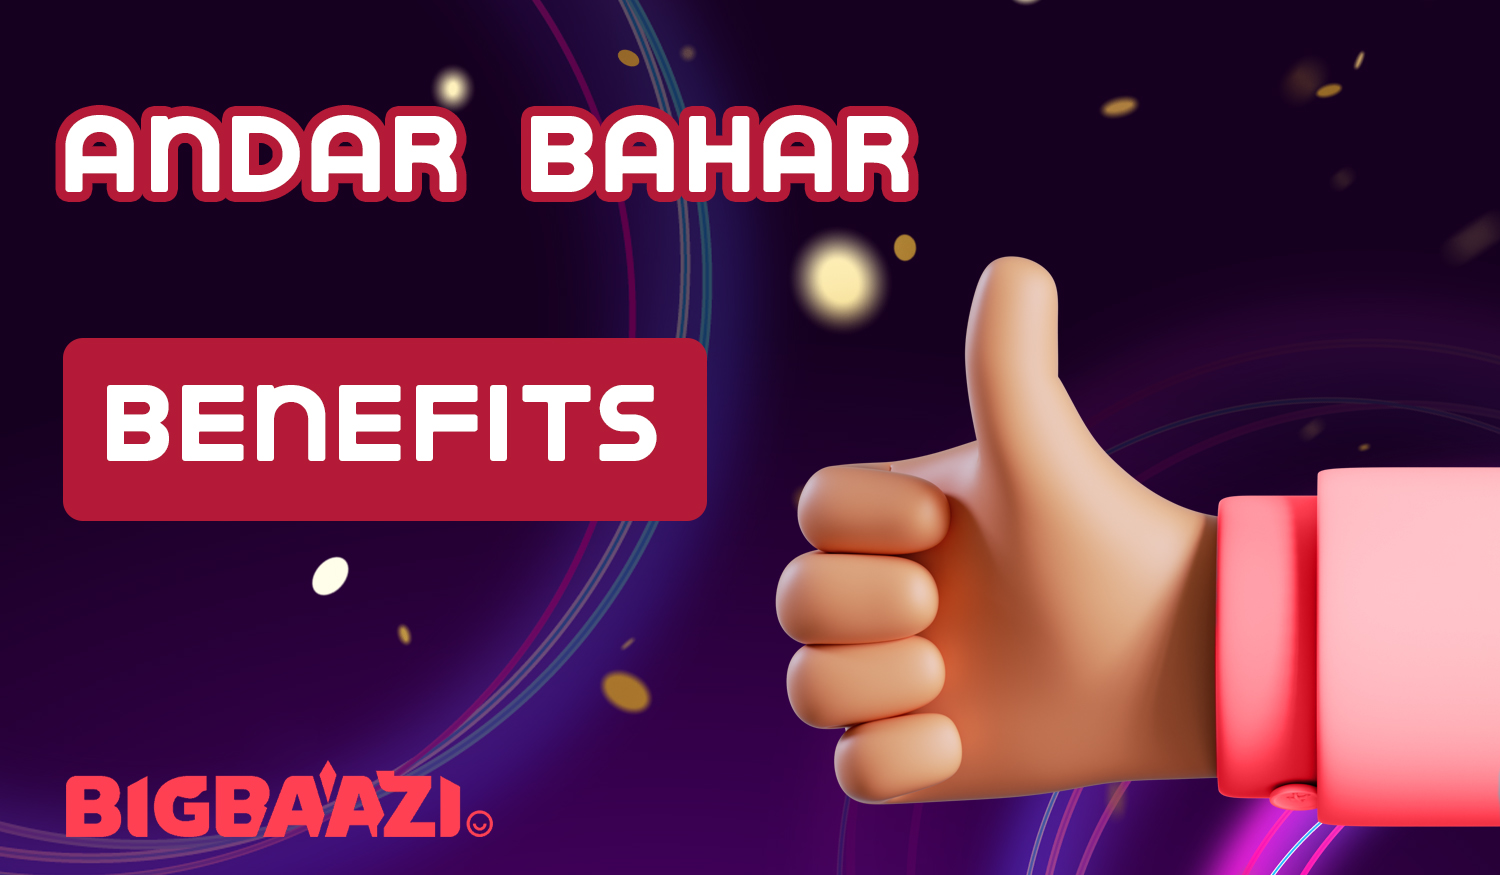 Why fans of the Andar Bahar game from India should choose Big Baazi